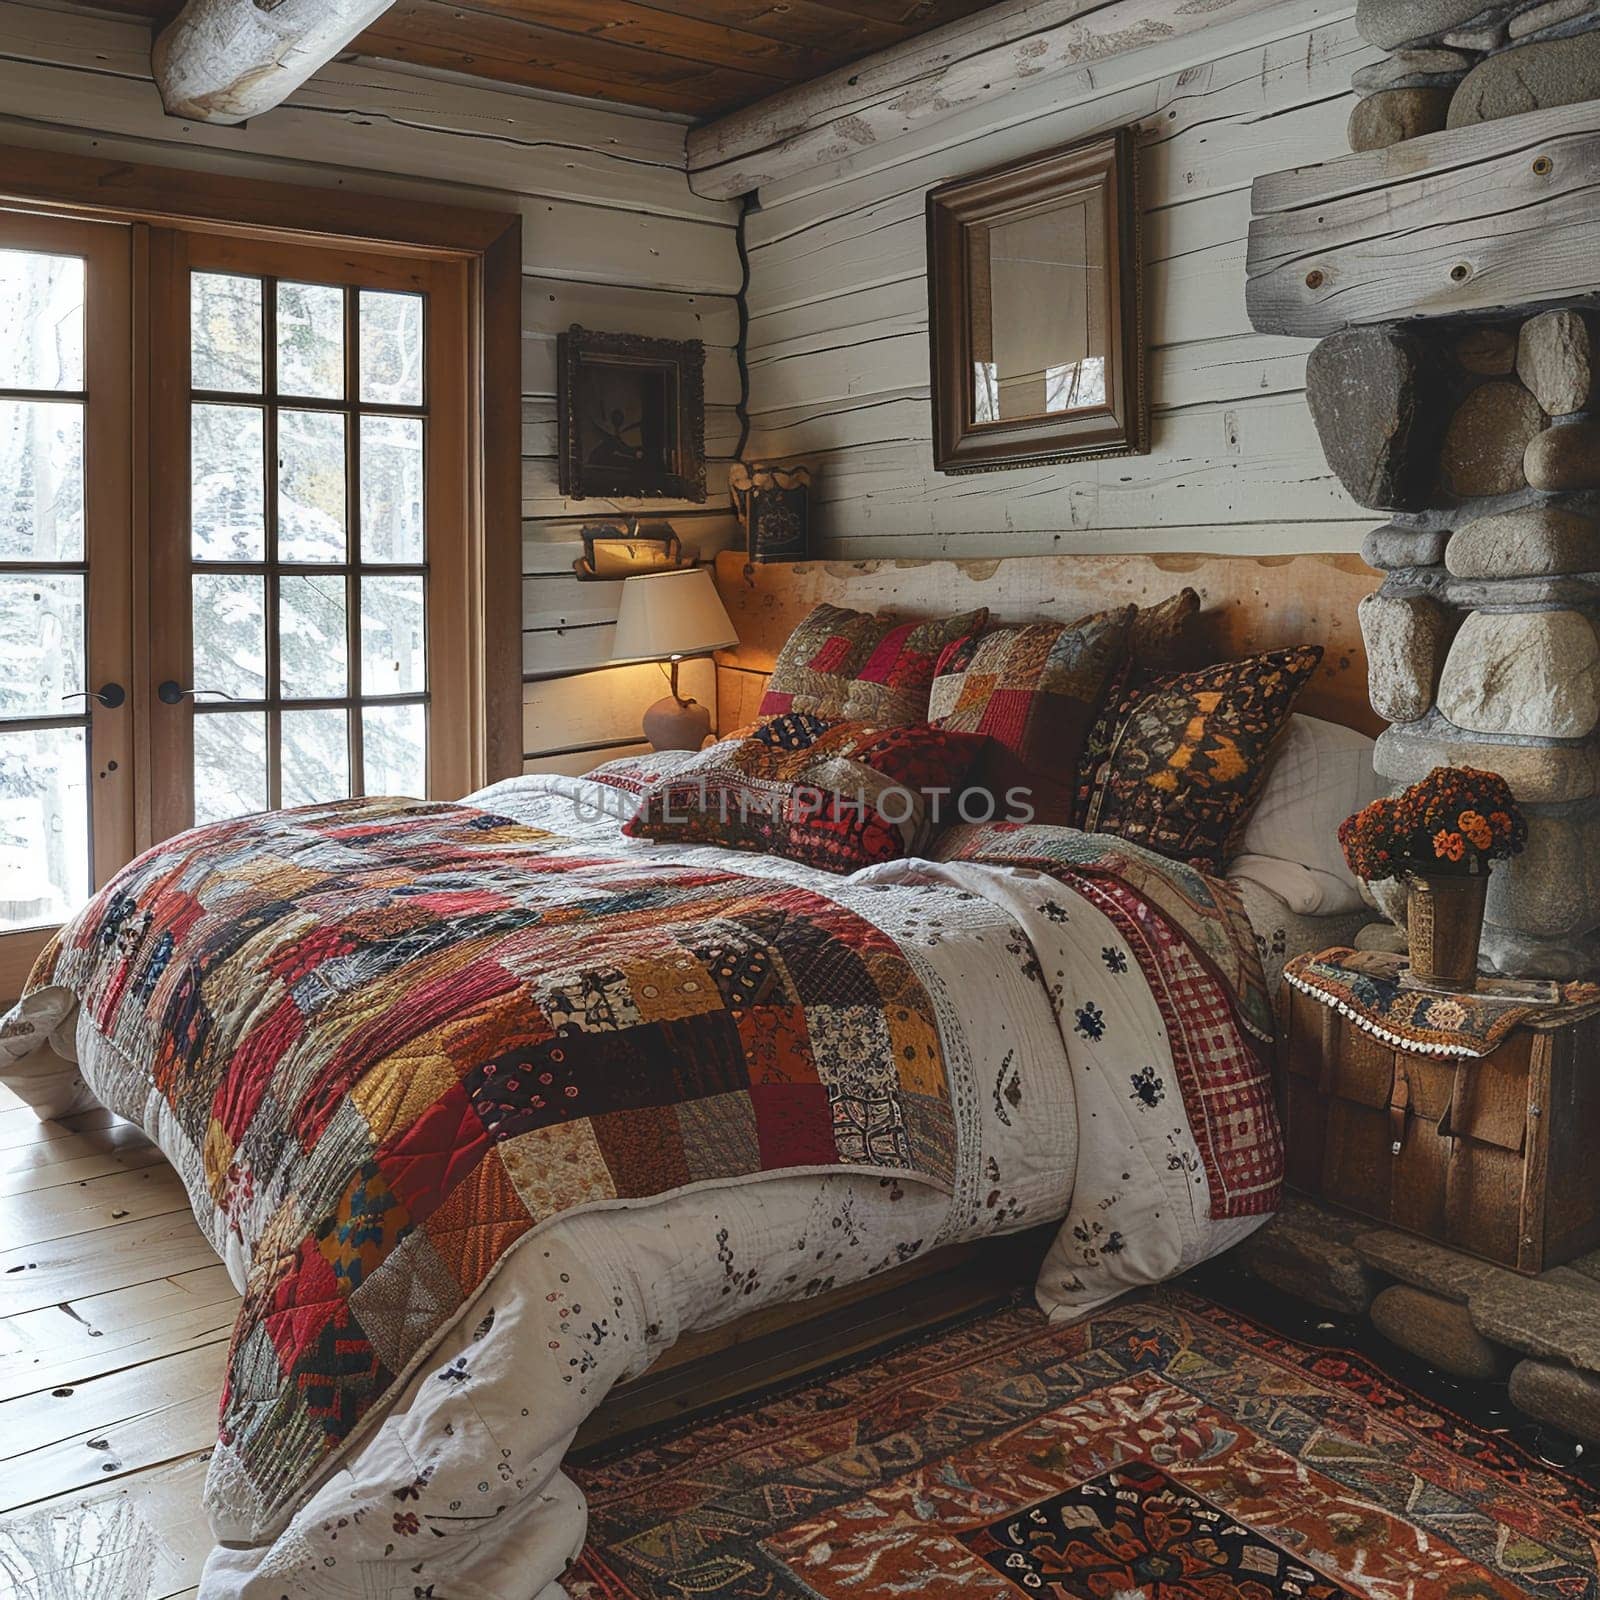 Cozy mountain cabin bedroom with a log bed, quilted blankets, and a stone hearth.